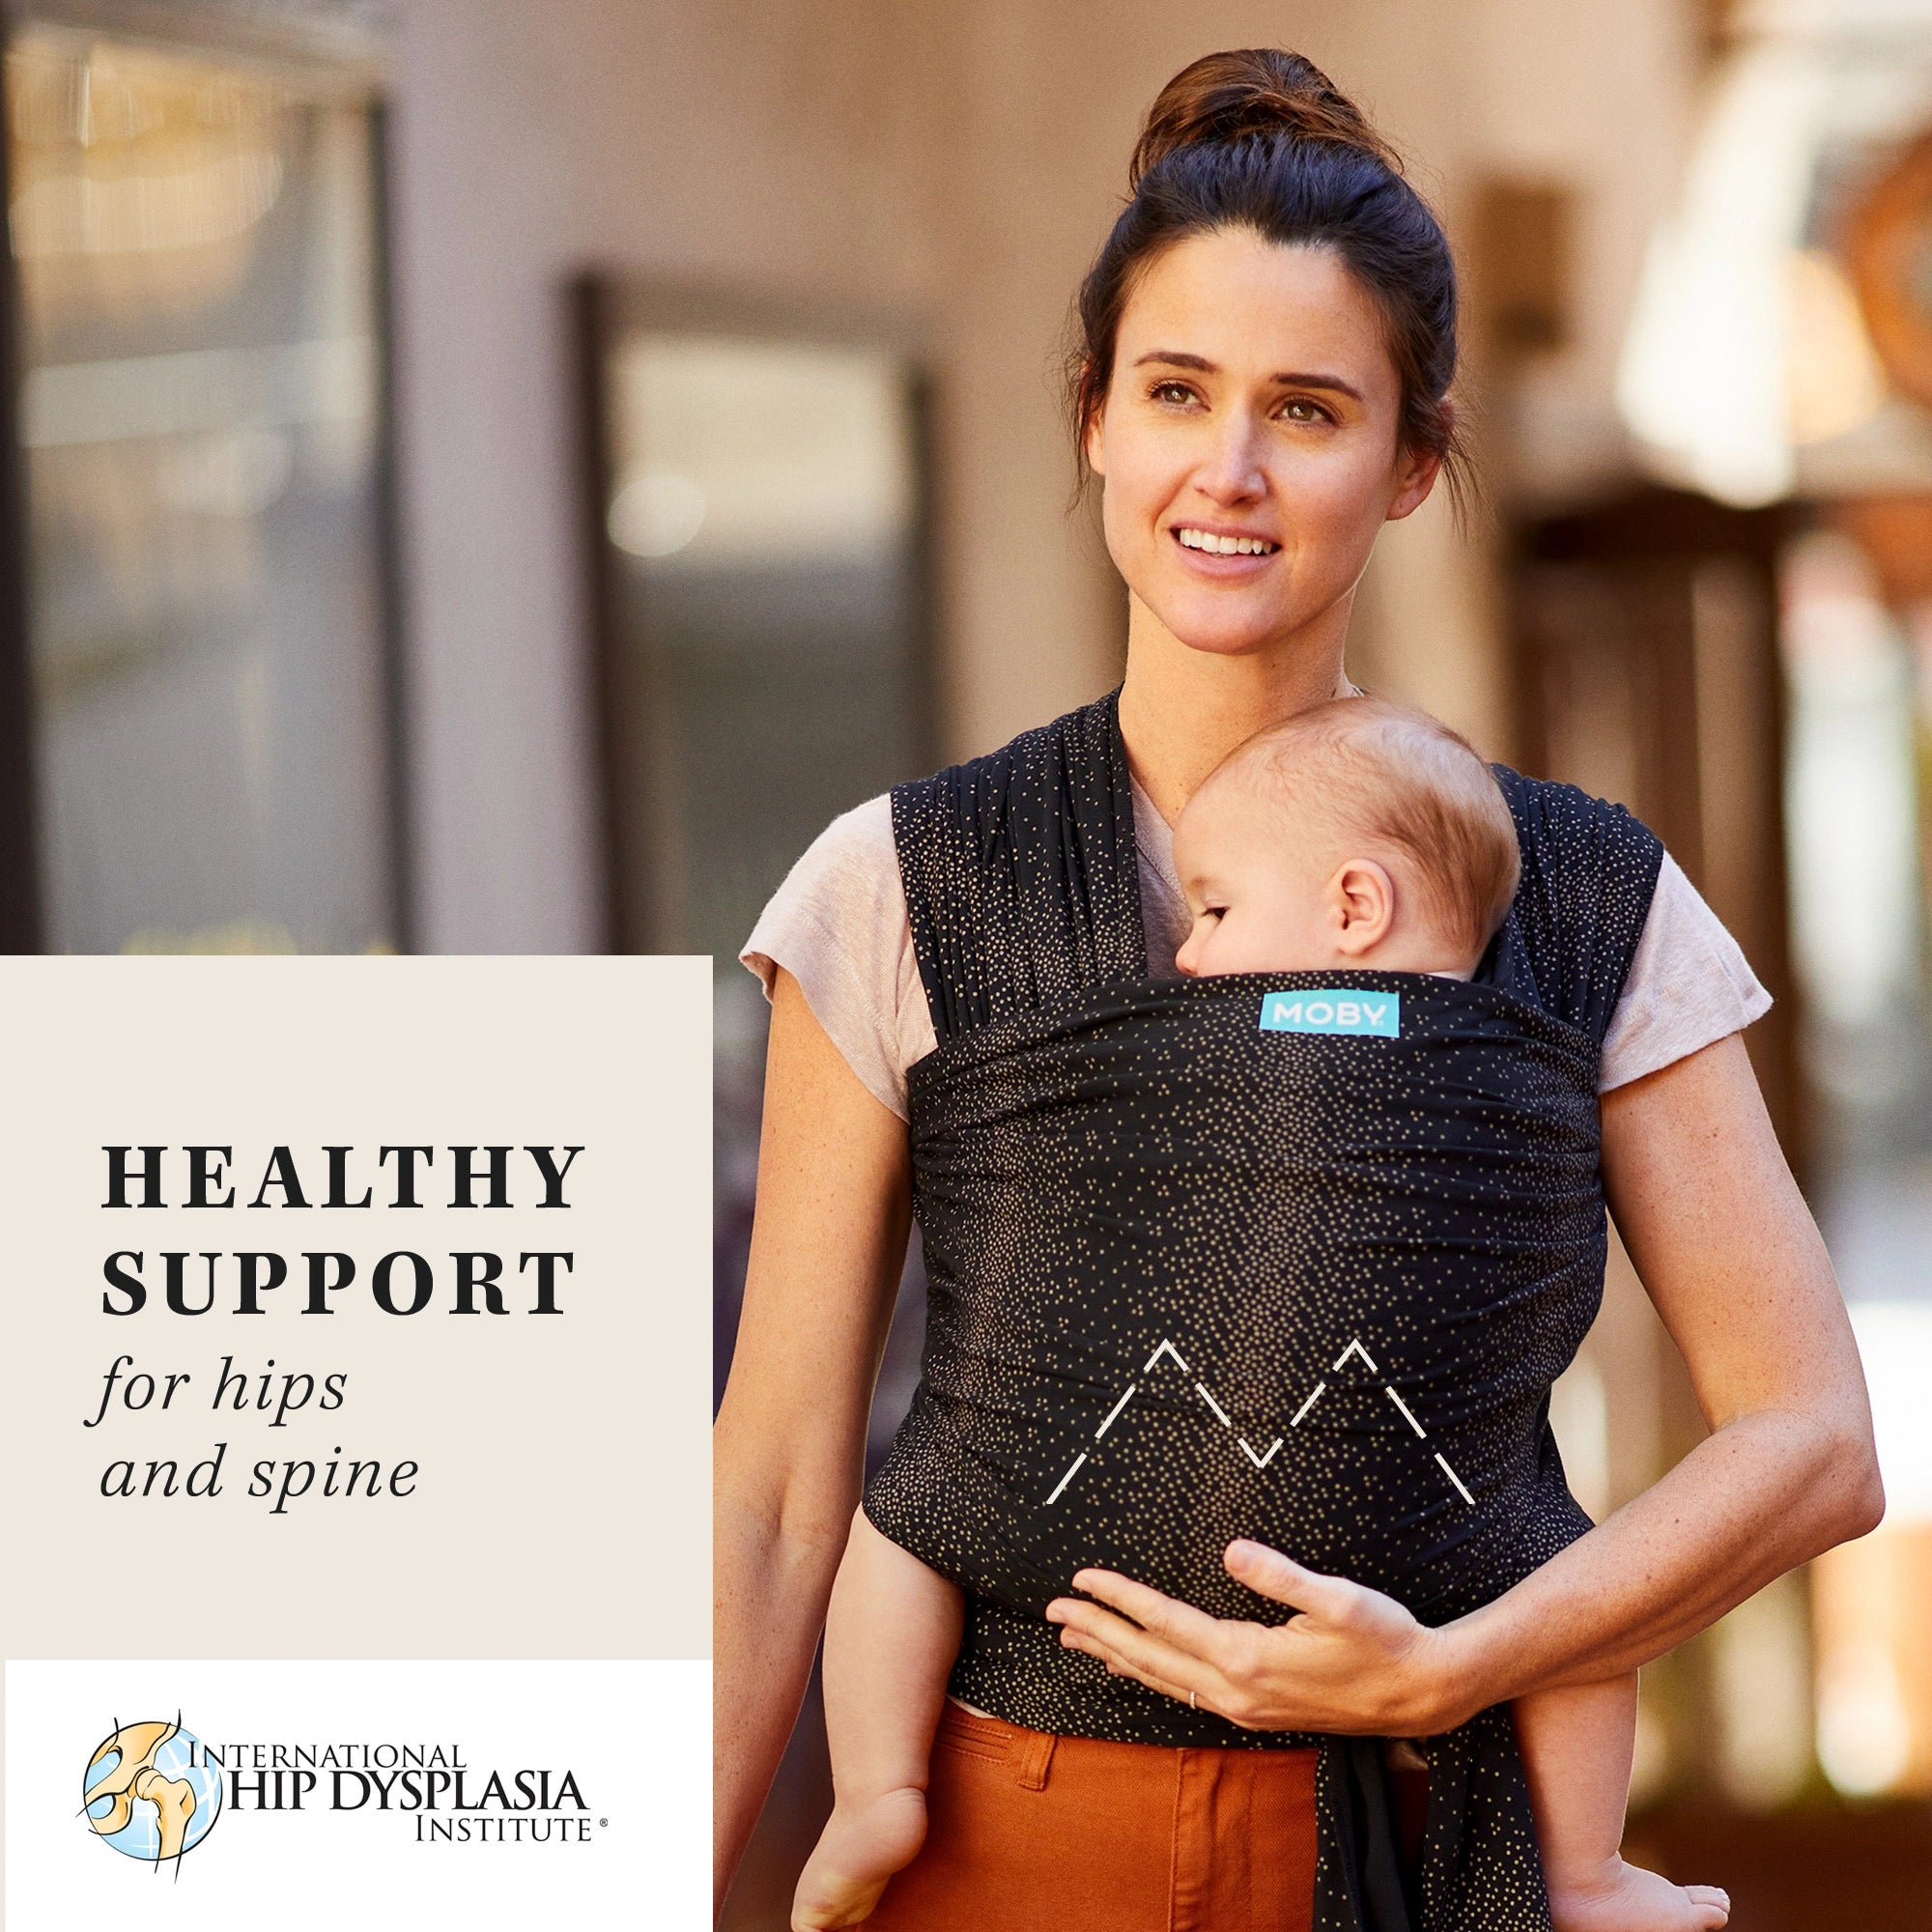 moby wrap hip healthy support for hips and spine certified by international hip dysplasia institute